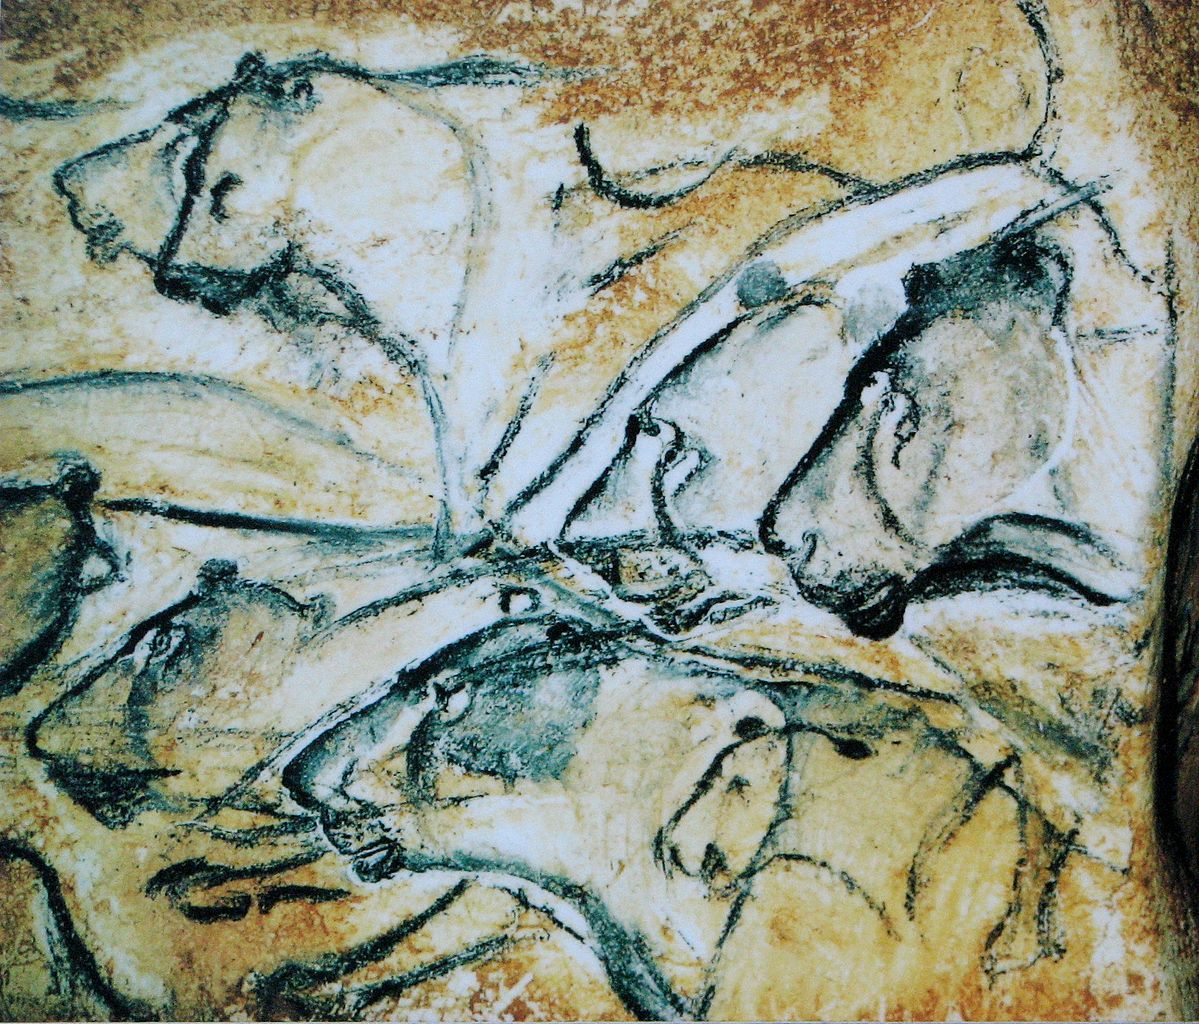 Autism human evolution - Some cave paintings, such as these from Chauvet Cave in southern France, show characteristics that are also commonly expressed by some autistic artists.